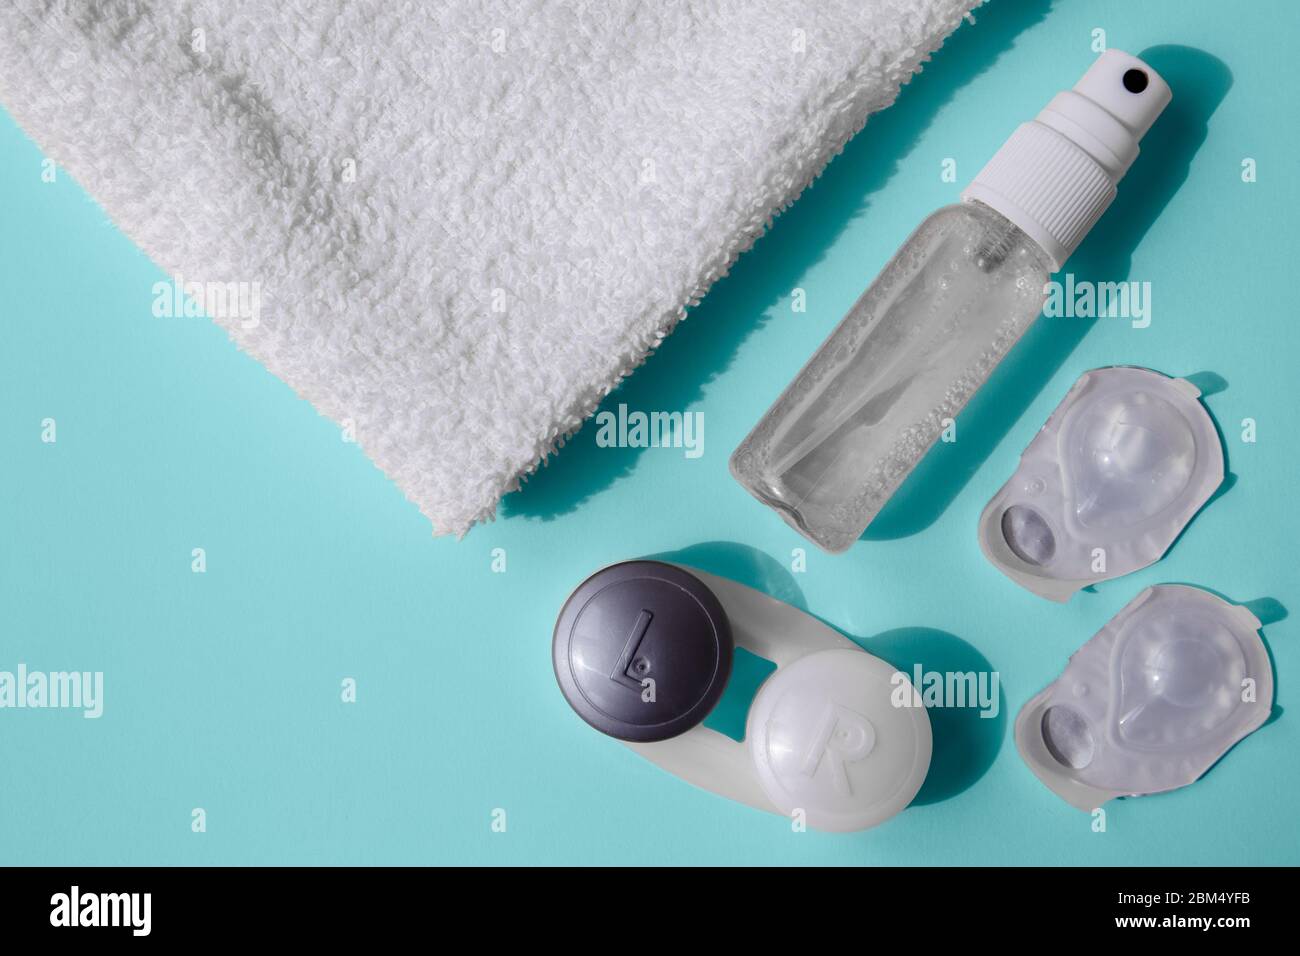 A set for using contact lenses. On a blue table are hand sanitizer, lens blisters, a lens container, and a white towel. Stock Photo